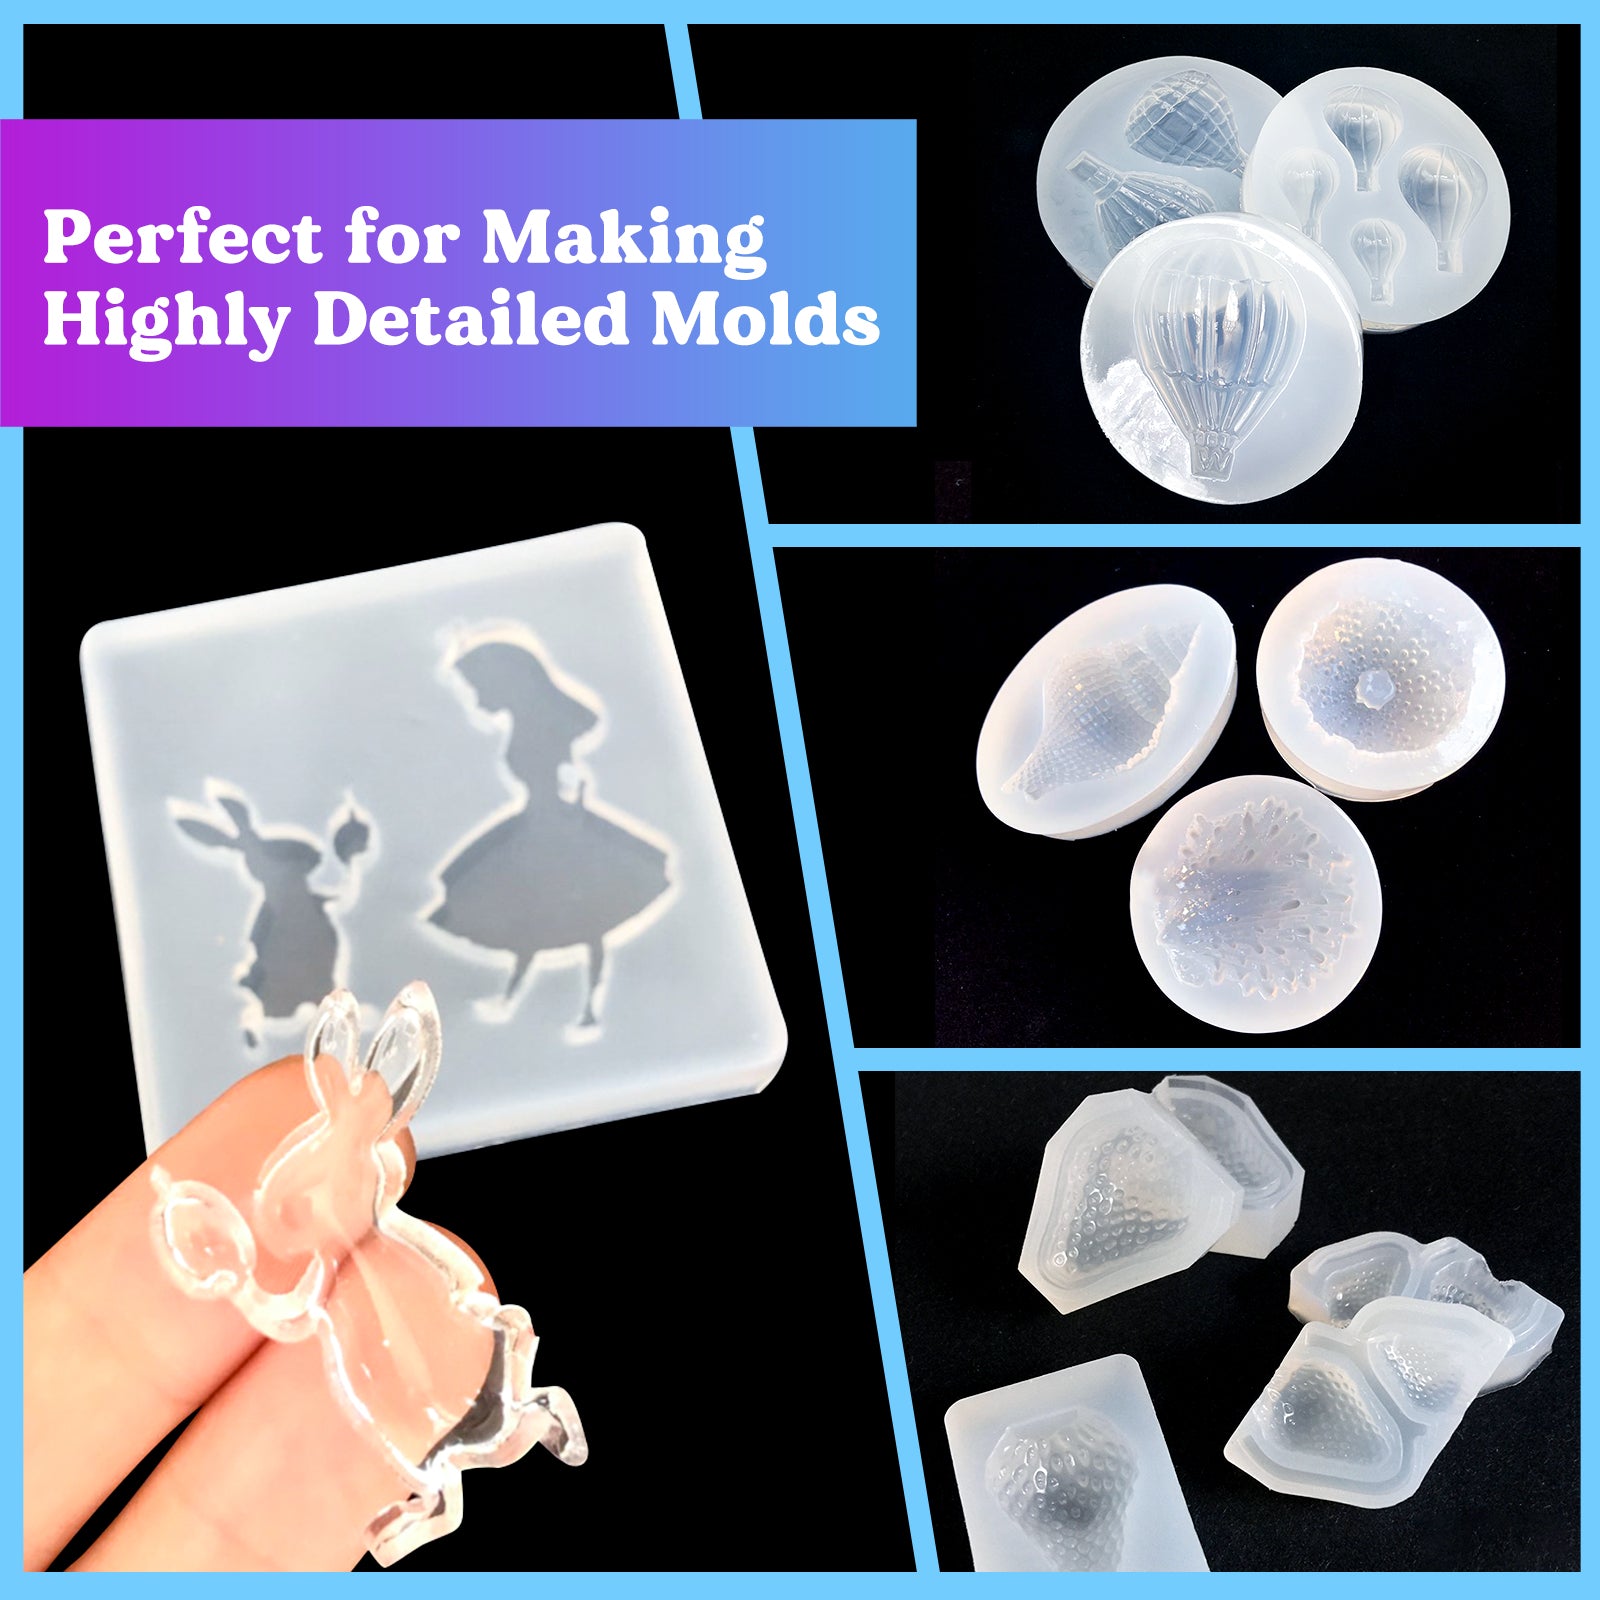 Let's Resin Silicone Rubber Mold Making Kit, Liquid Silicone for Molds DIY, Non-Toxic Mixing Ratio 1:1 Mold Making Silicone